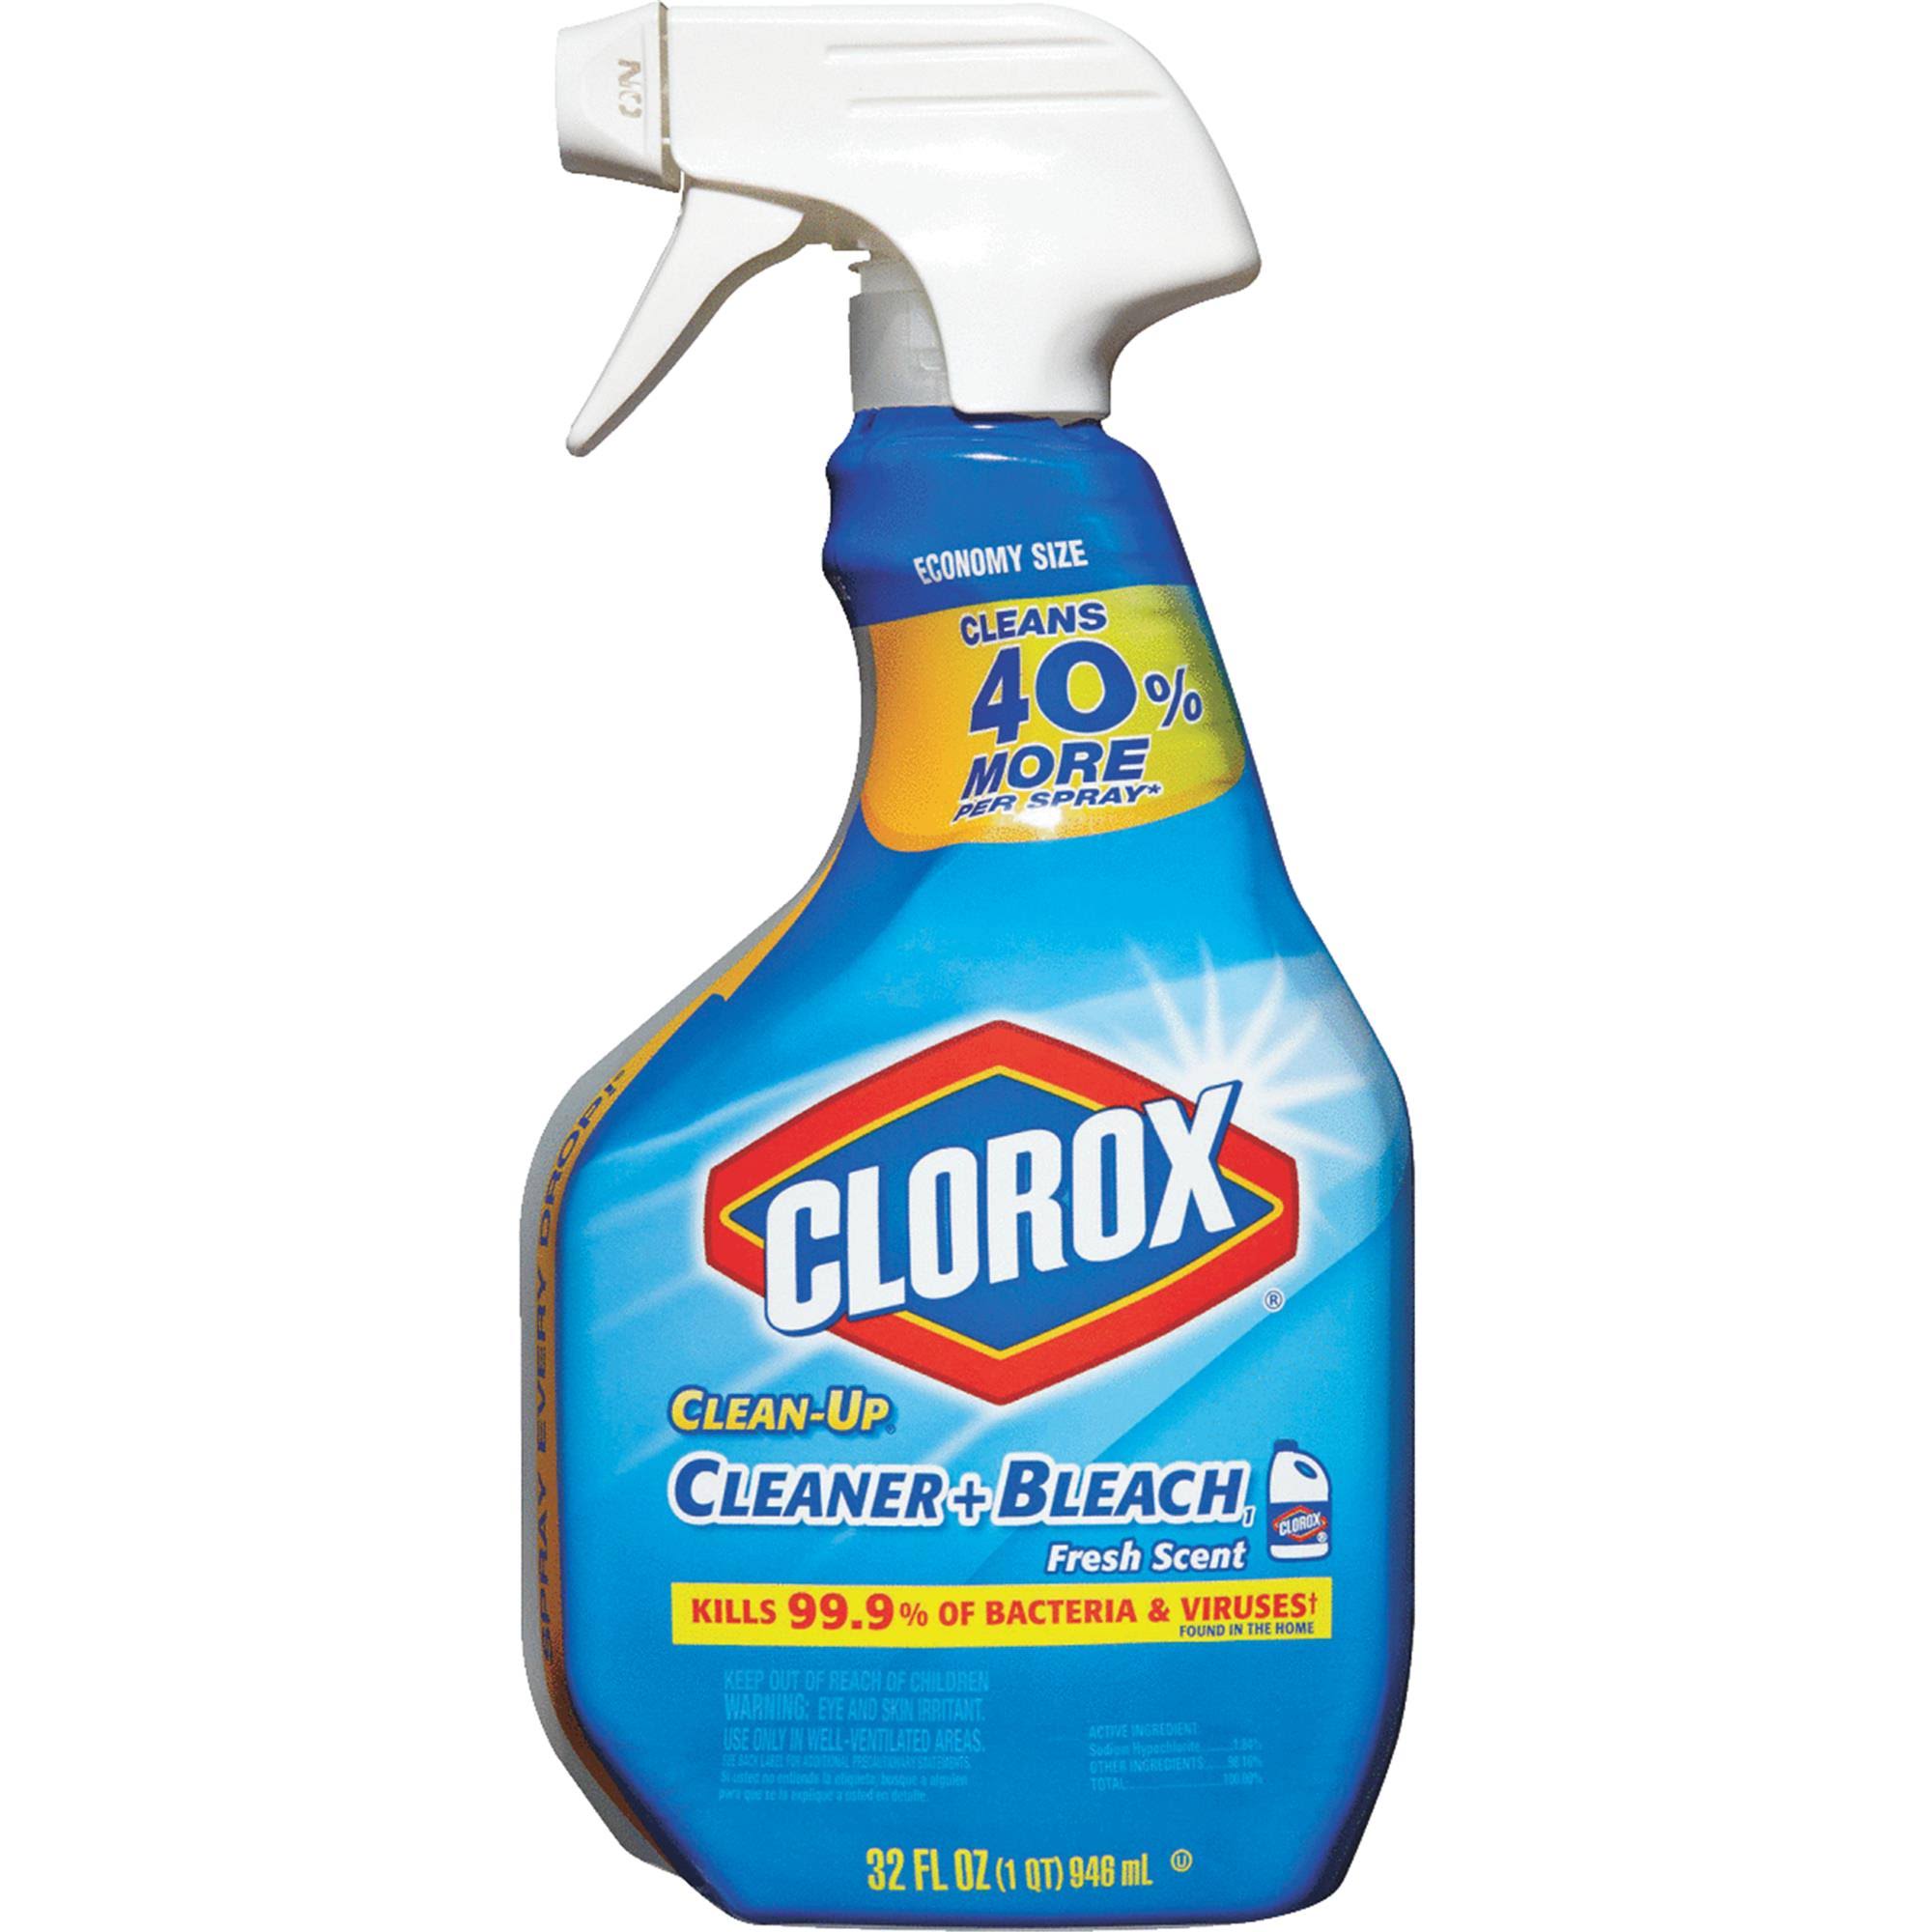 Clorox Clean-Up Disinfectant Cleaner Bleach - Fresh Scent, 32oz